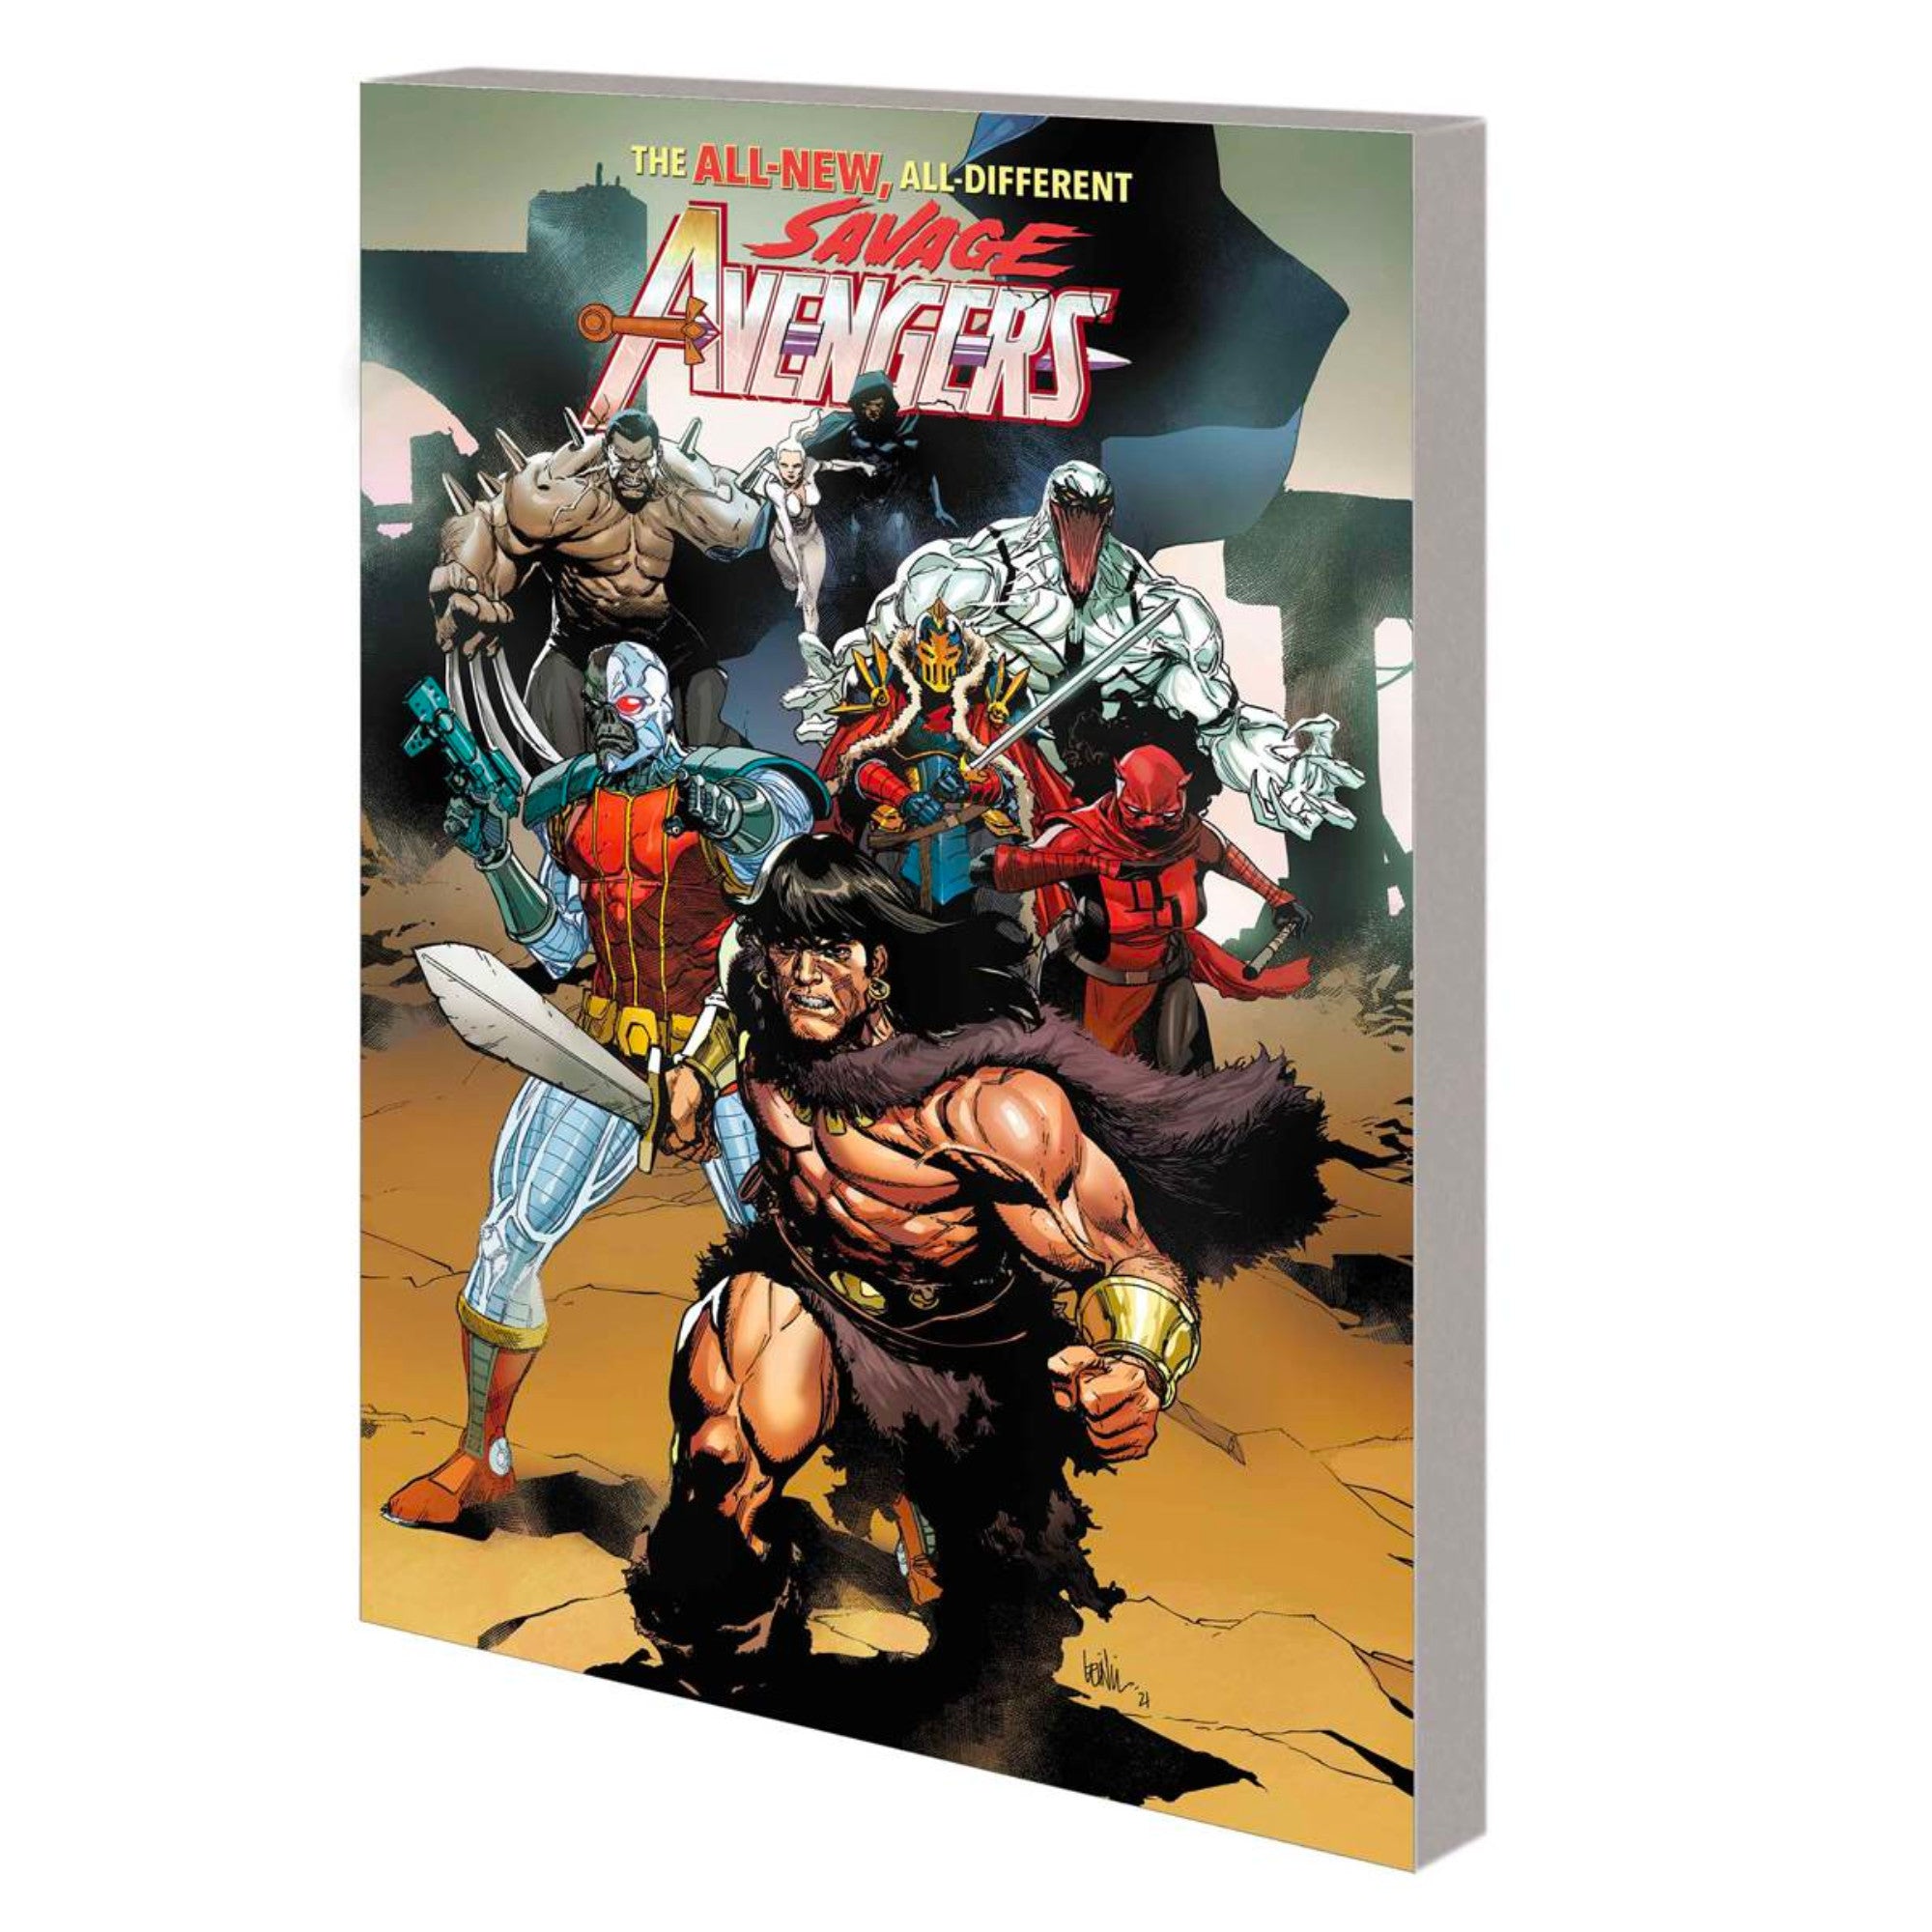 Savage Avengers Trade Paperback Volume 1 "Time is the Sharpest Edge" FINALSALE